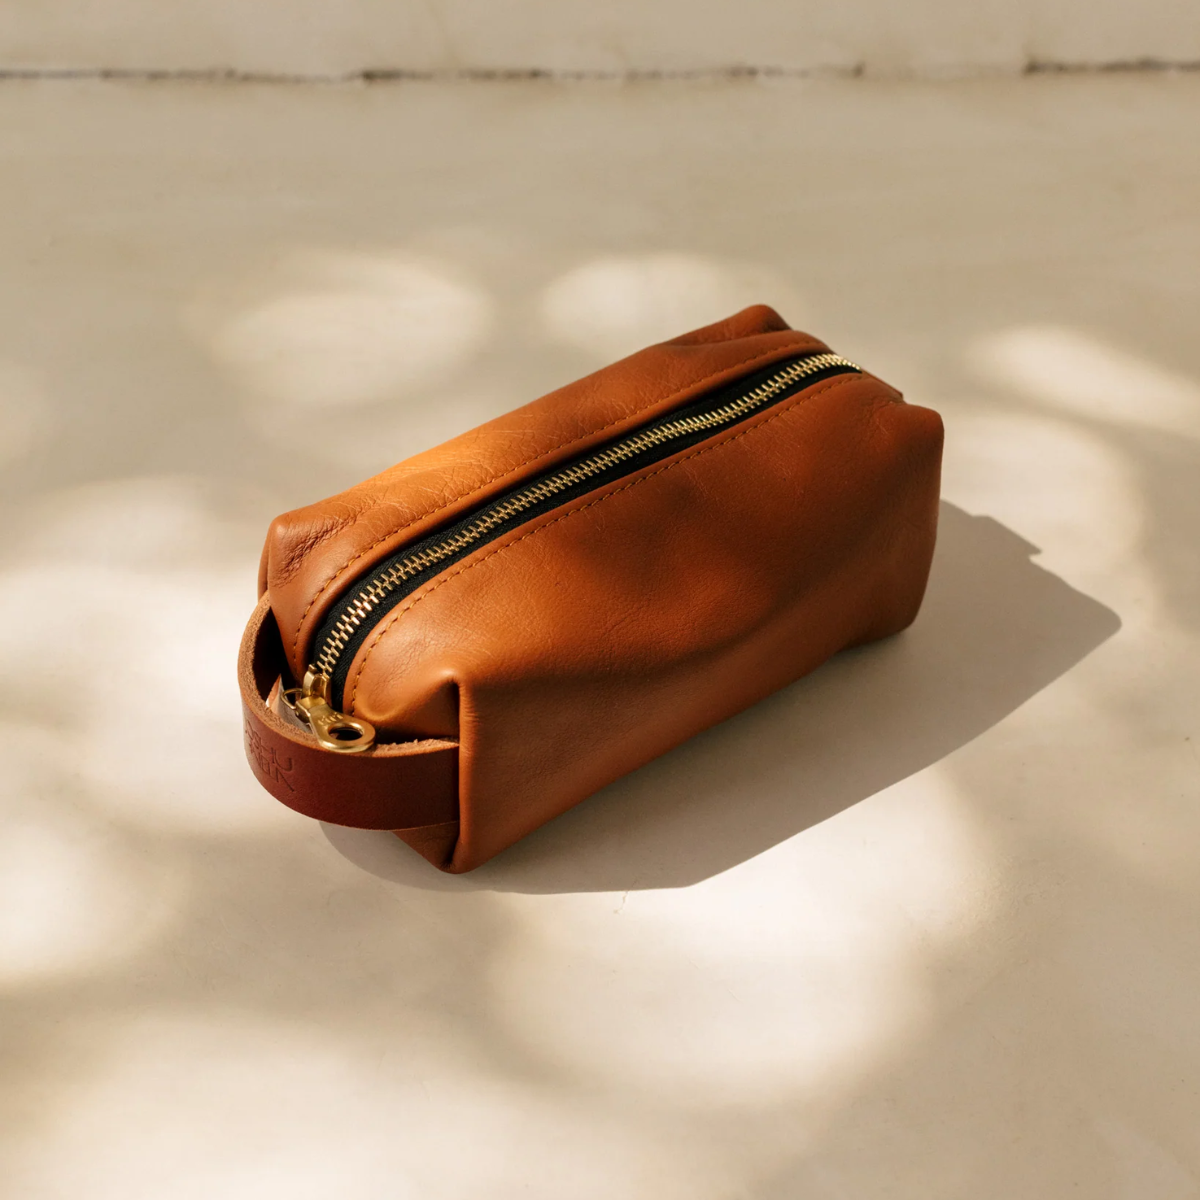 3. Timeless Elegance: Leather Dopp Kit, the Perfect 3rd Anniversary Gift for Him